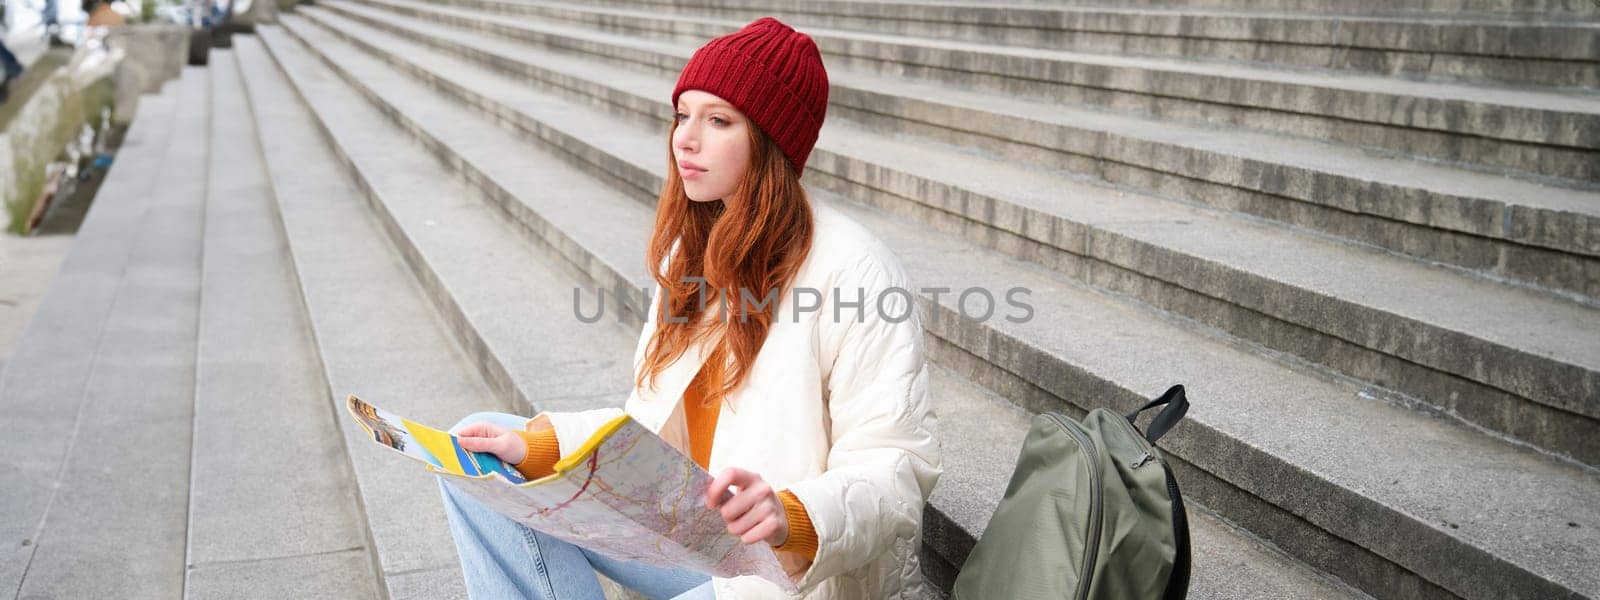 Tourism and lifestyle concept. Young redhead woman looking at city map, plans a route for sightseeing day, sits outdoors on stairs and rests.